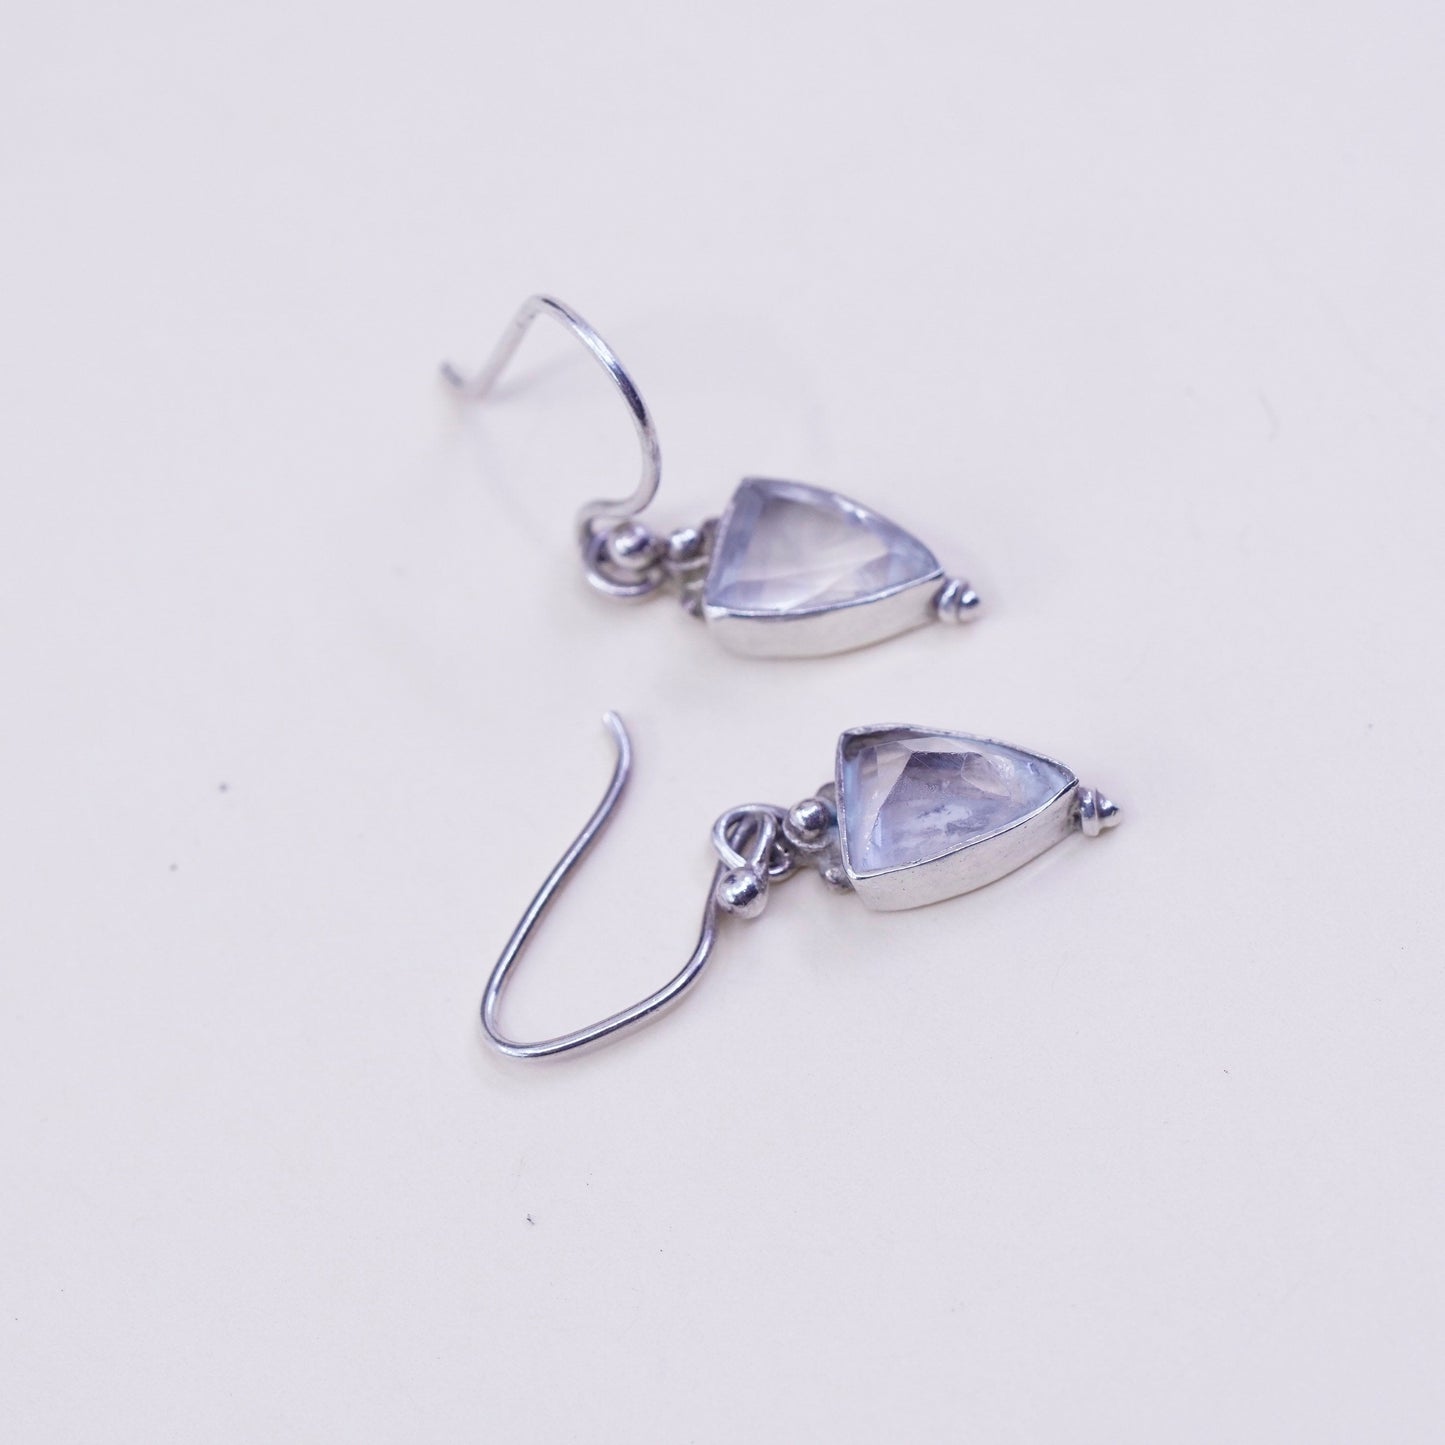 Vintage Sterling 925 silver handmade earrings, Dangles with crystal dangles, silver tested